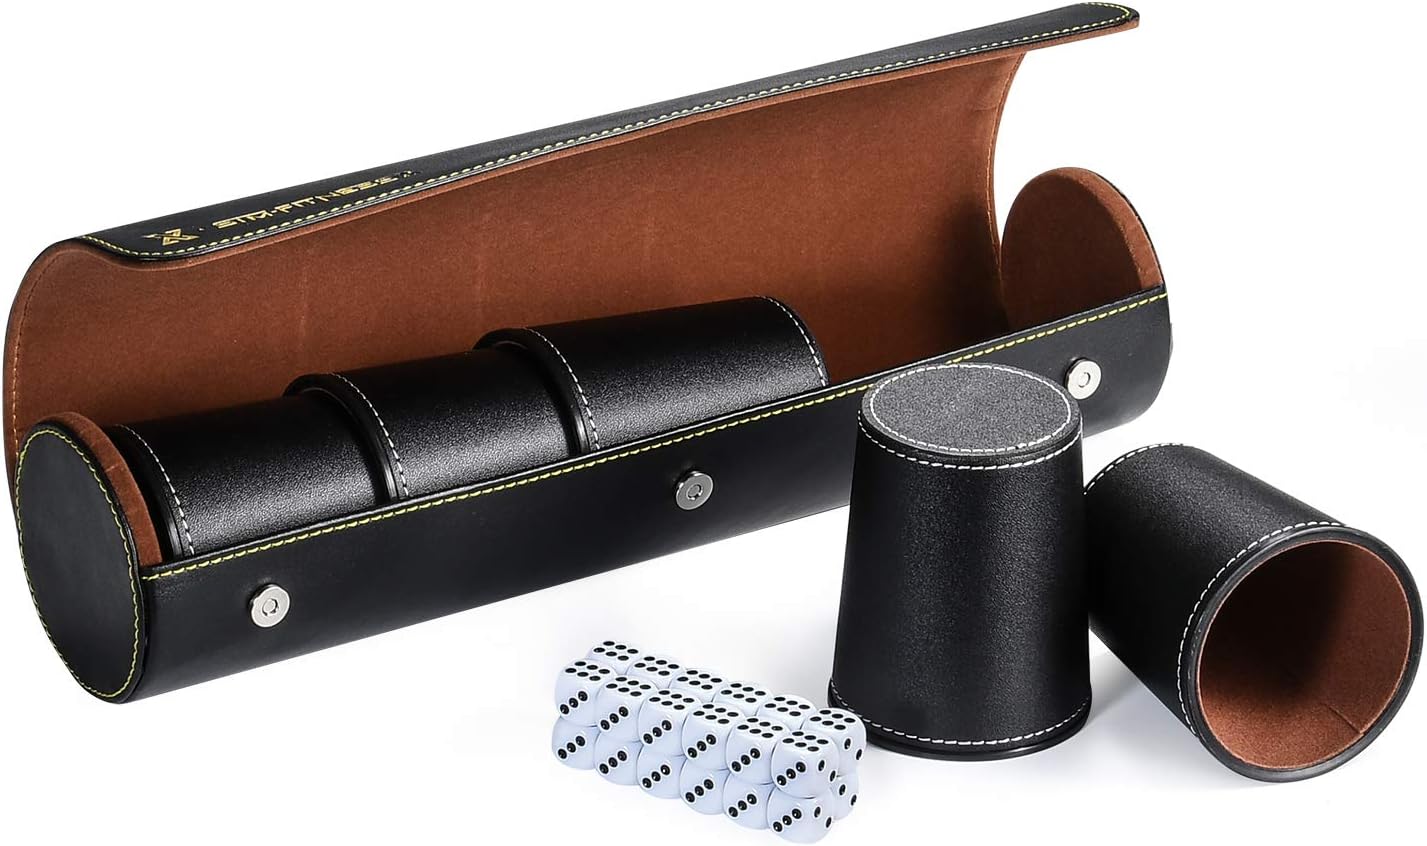 Professional Dice Cup 5 Dice Black Leatherette Smooth Velvet Backgammon Games 